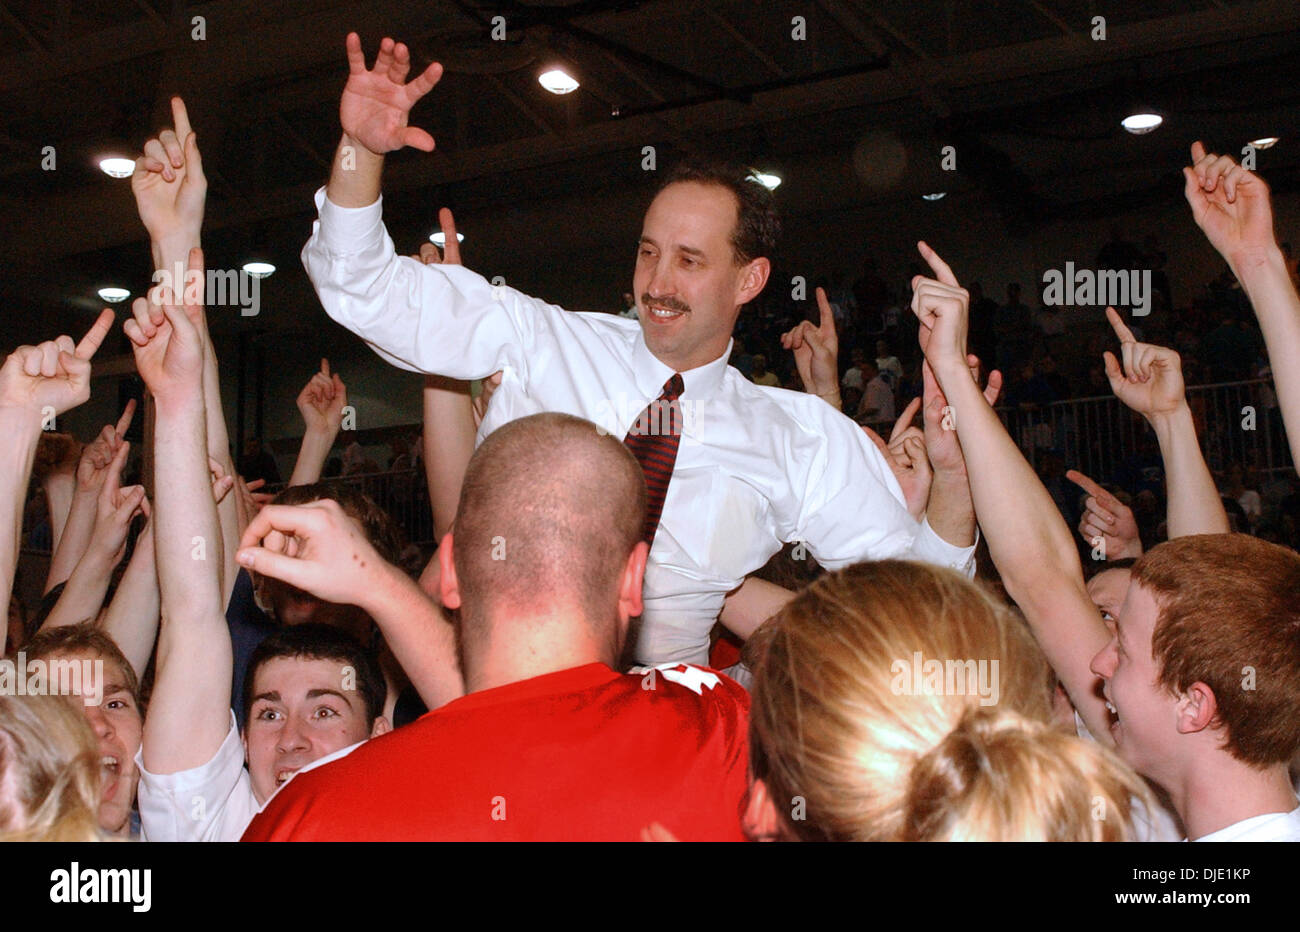 Mar 15, 2003 - Union, Kentucky, USA - St. Henry's Head Coach DAVE FAUST is carried off the court by fans, following his team's win over Simon Kenton High School  49 to 53 for the Kentucky 9th Region Boys Basketball Championship.  (Credit Image: © Ken Stewart/ZUMA Press) Stock Photo